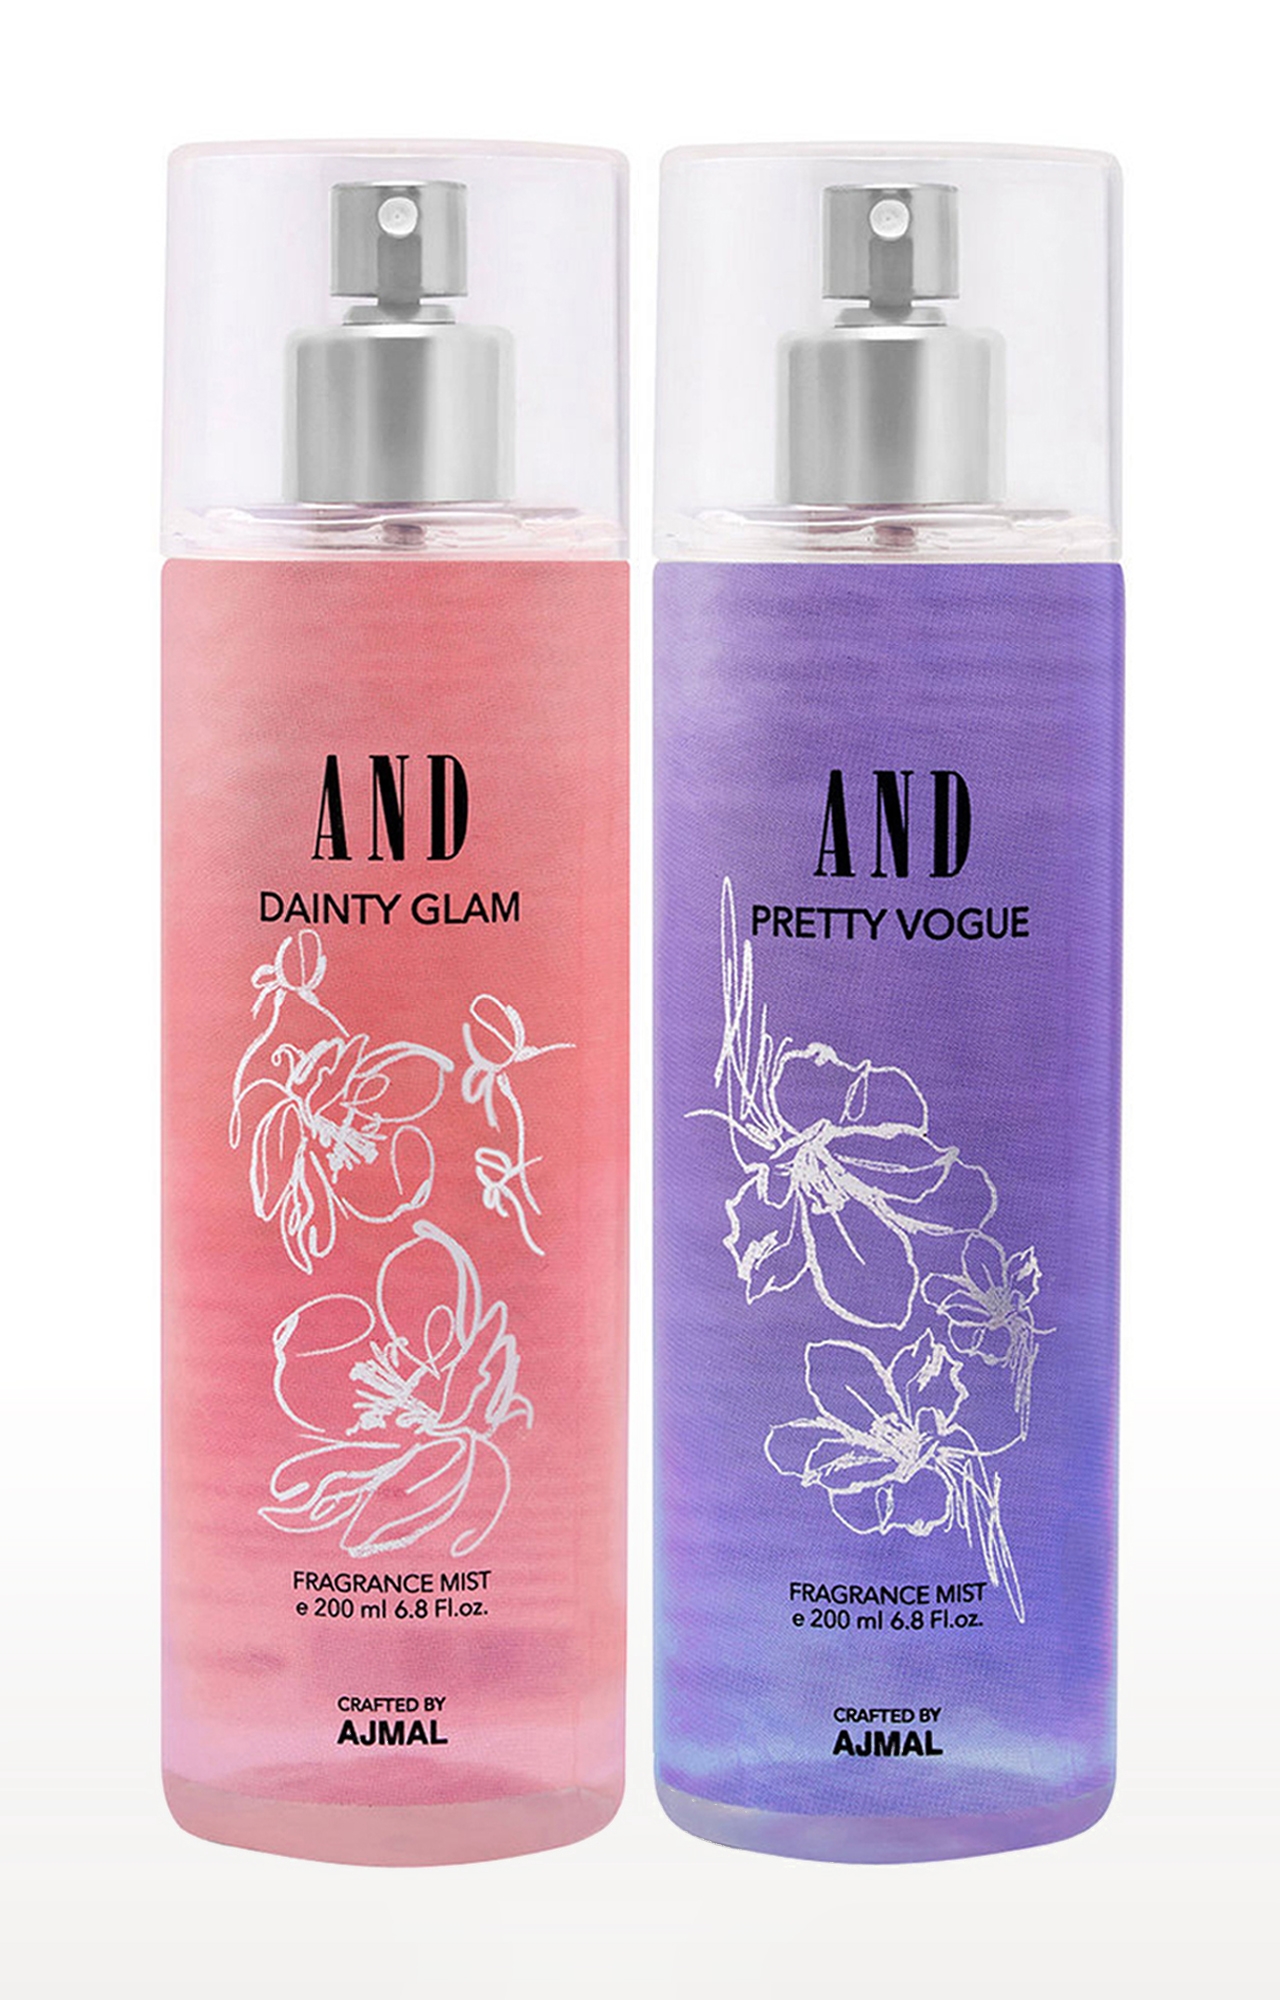 AND Dainty Glam & Pretty Vogue Pack of 2 Body Mist 200ML each Long Lasting Scent Spray Gift for Women Perfume Crafted by Ajmal FREE